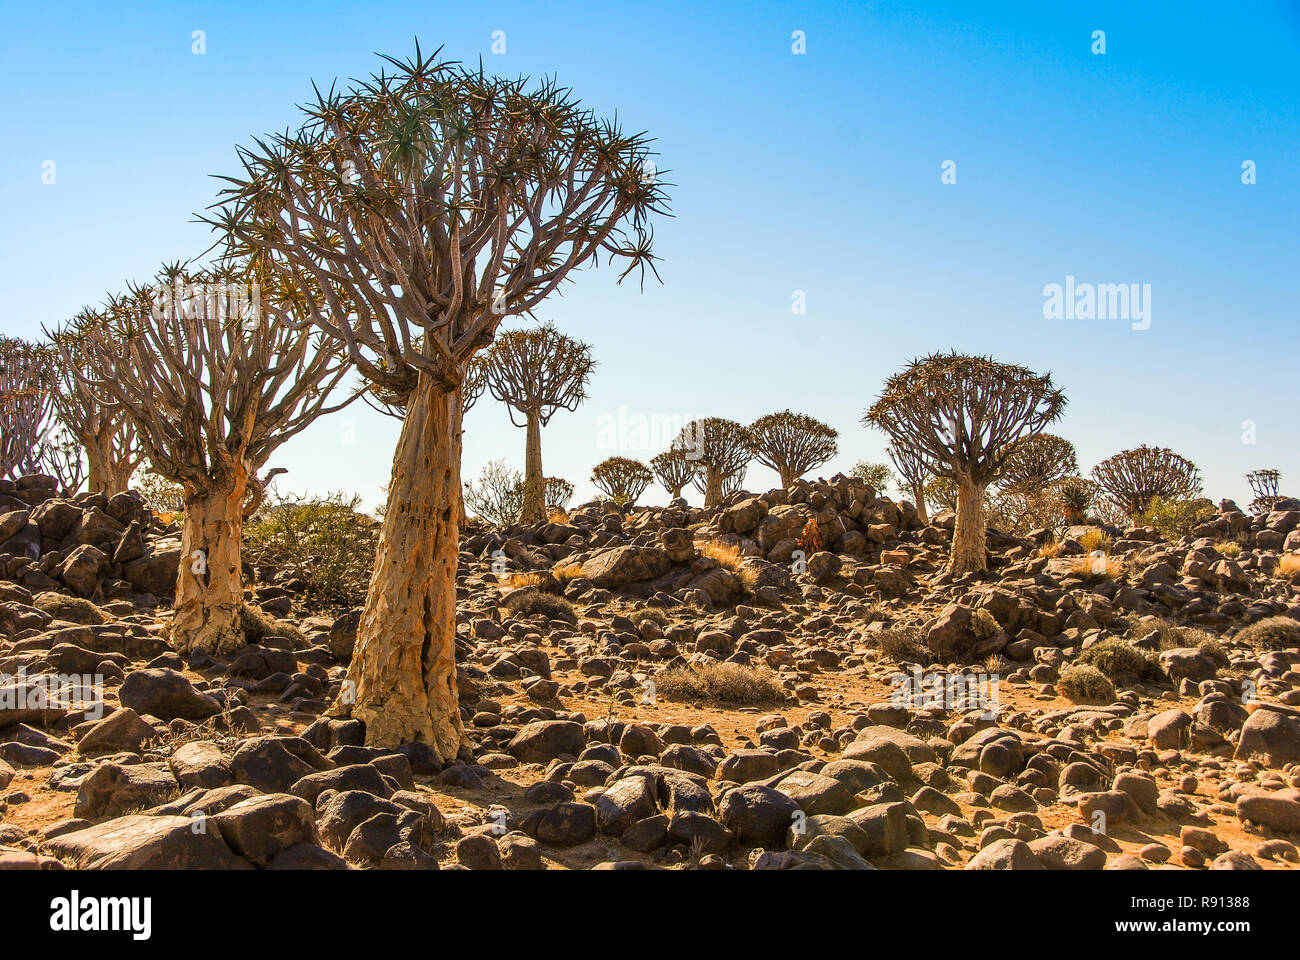 Quiver Tree Forest (Aloe Aloidendron dichotoma) or kokerboom or Köcherbaumwald near Keetmanshoop in Namibia, Africa Stock Photo